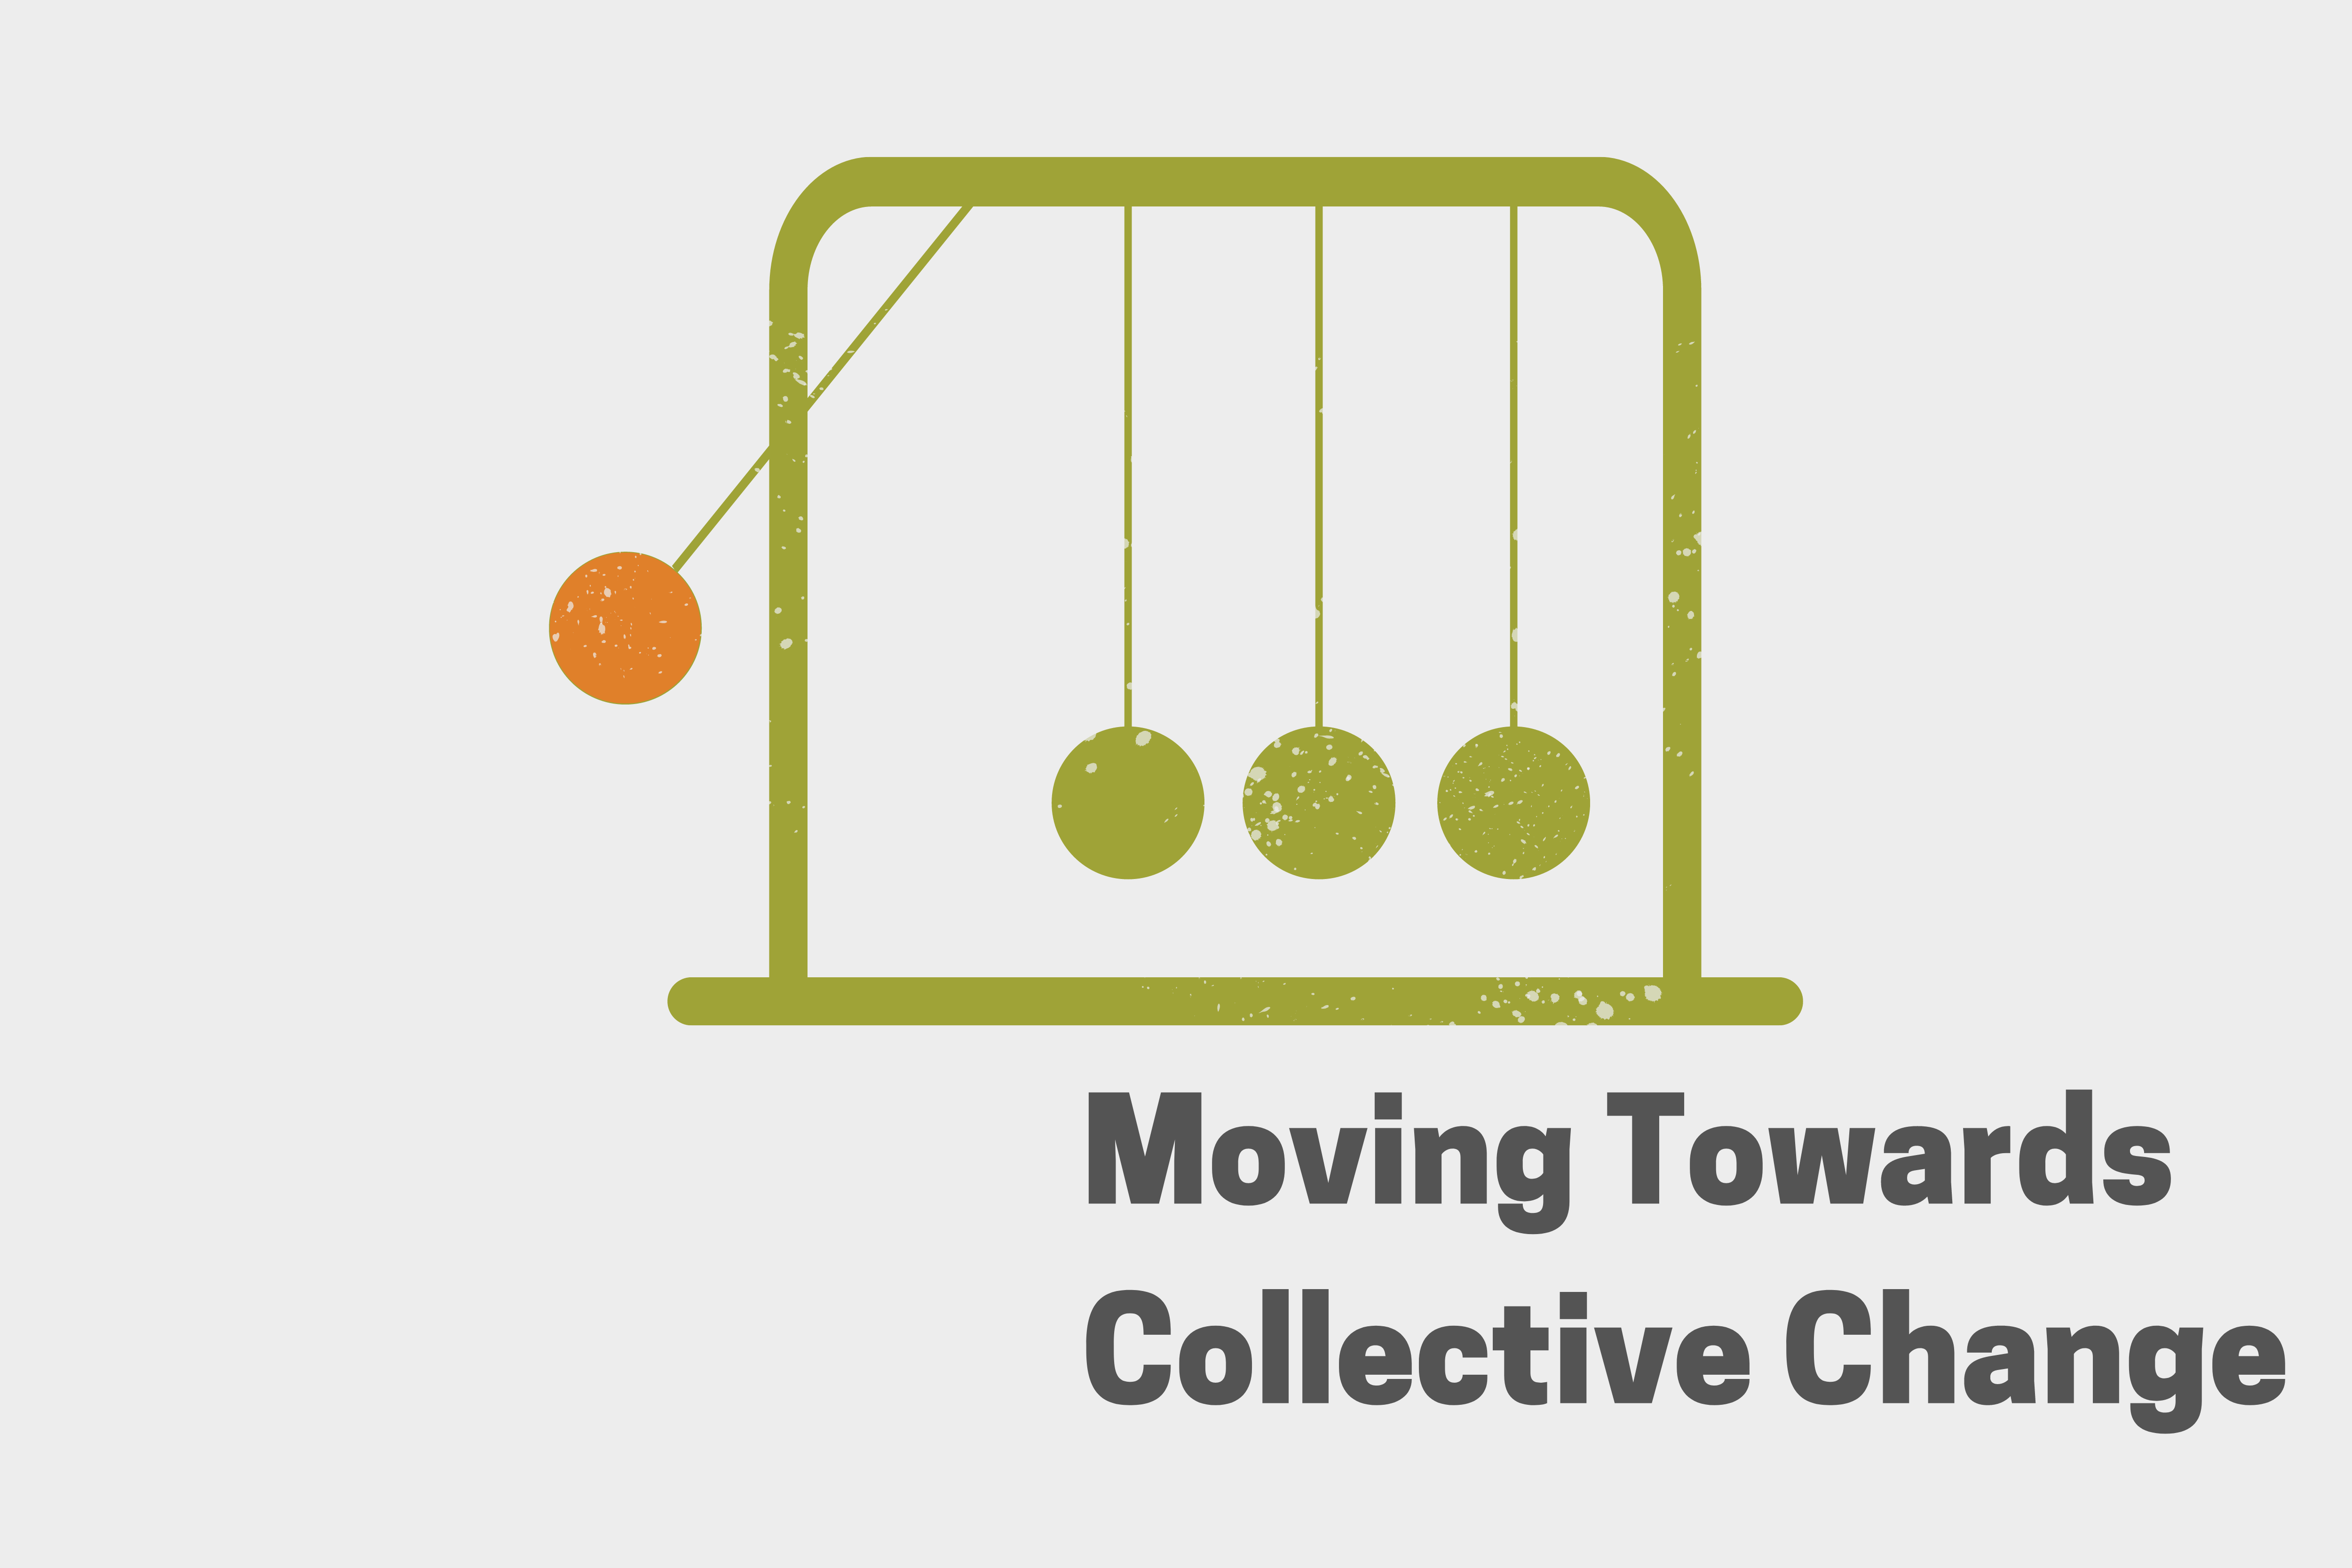 Moving Towards Collective Change; image shows green Newton's cradle with one orange ball in motion